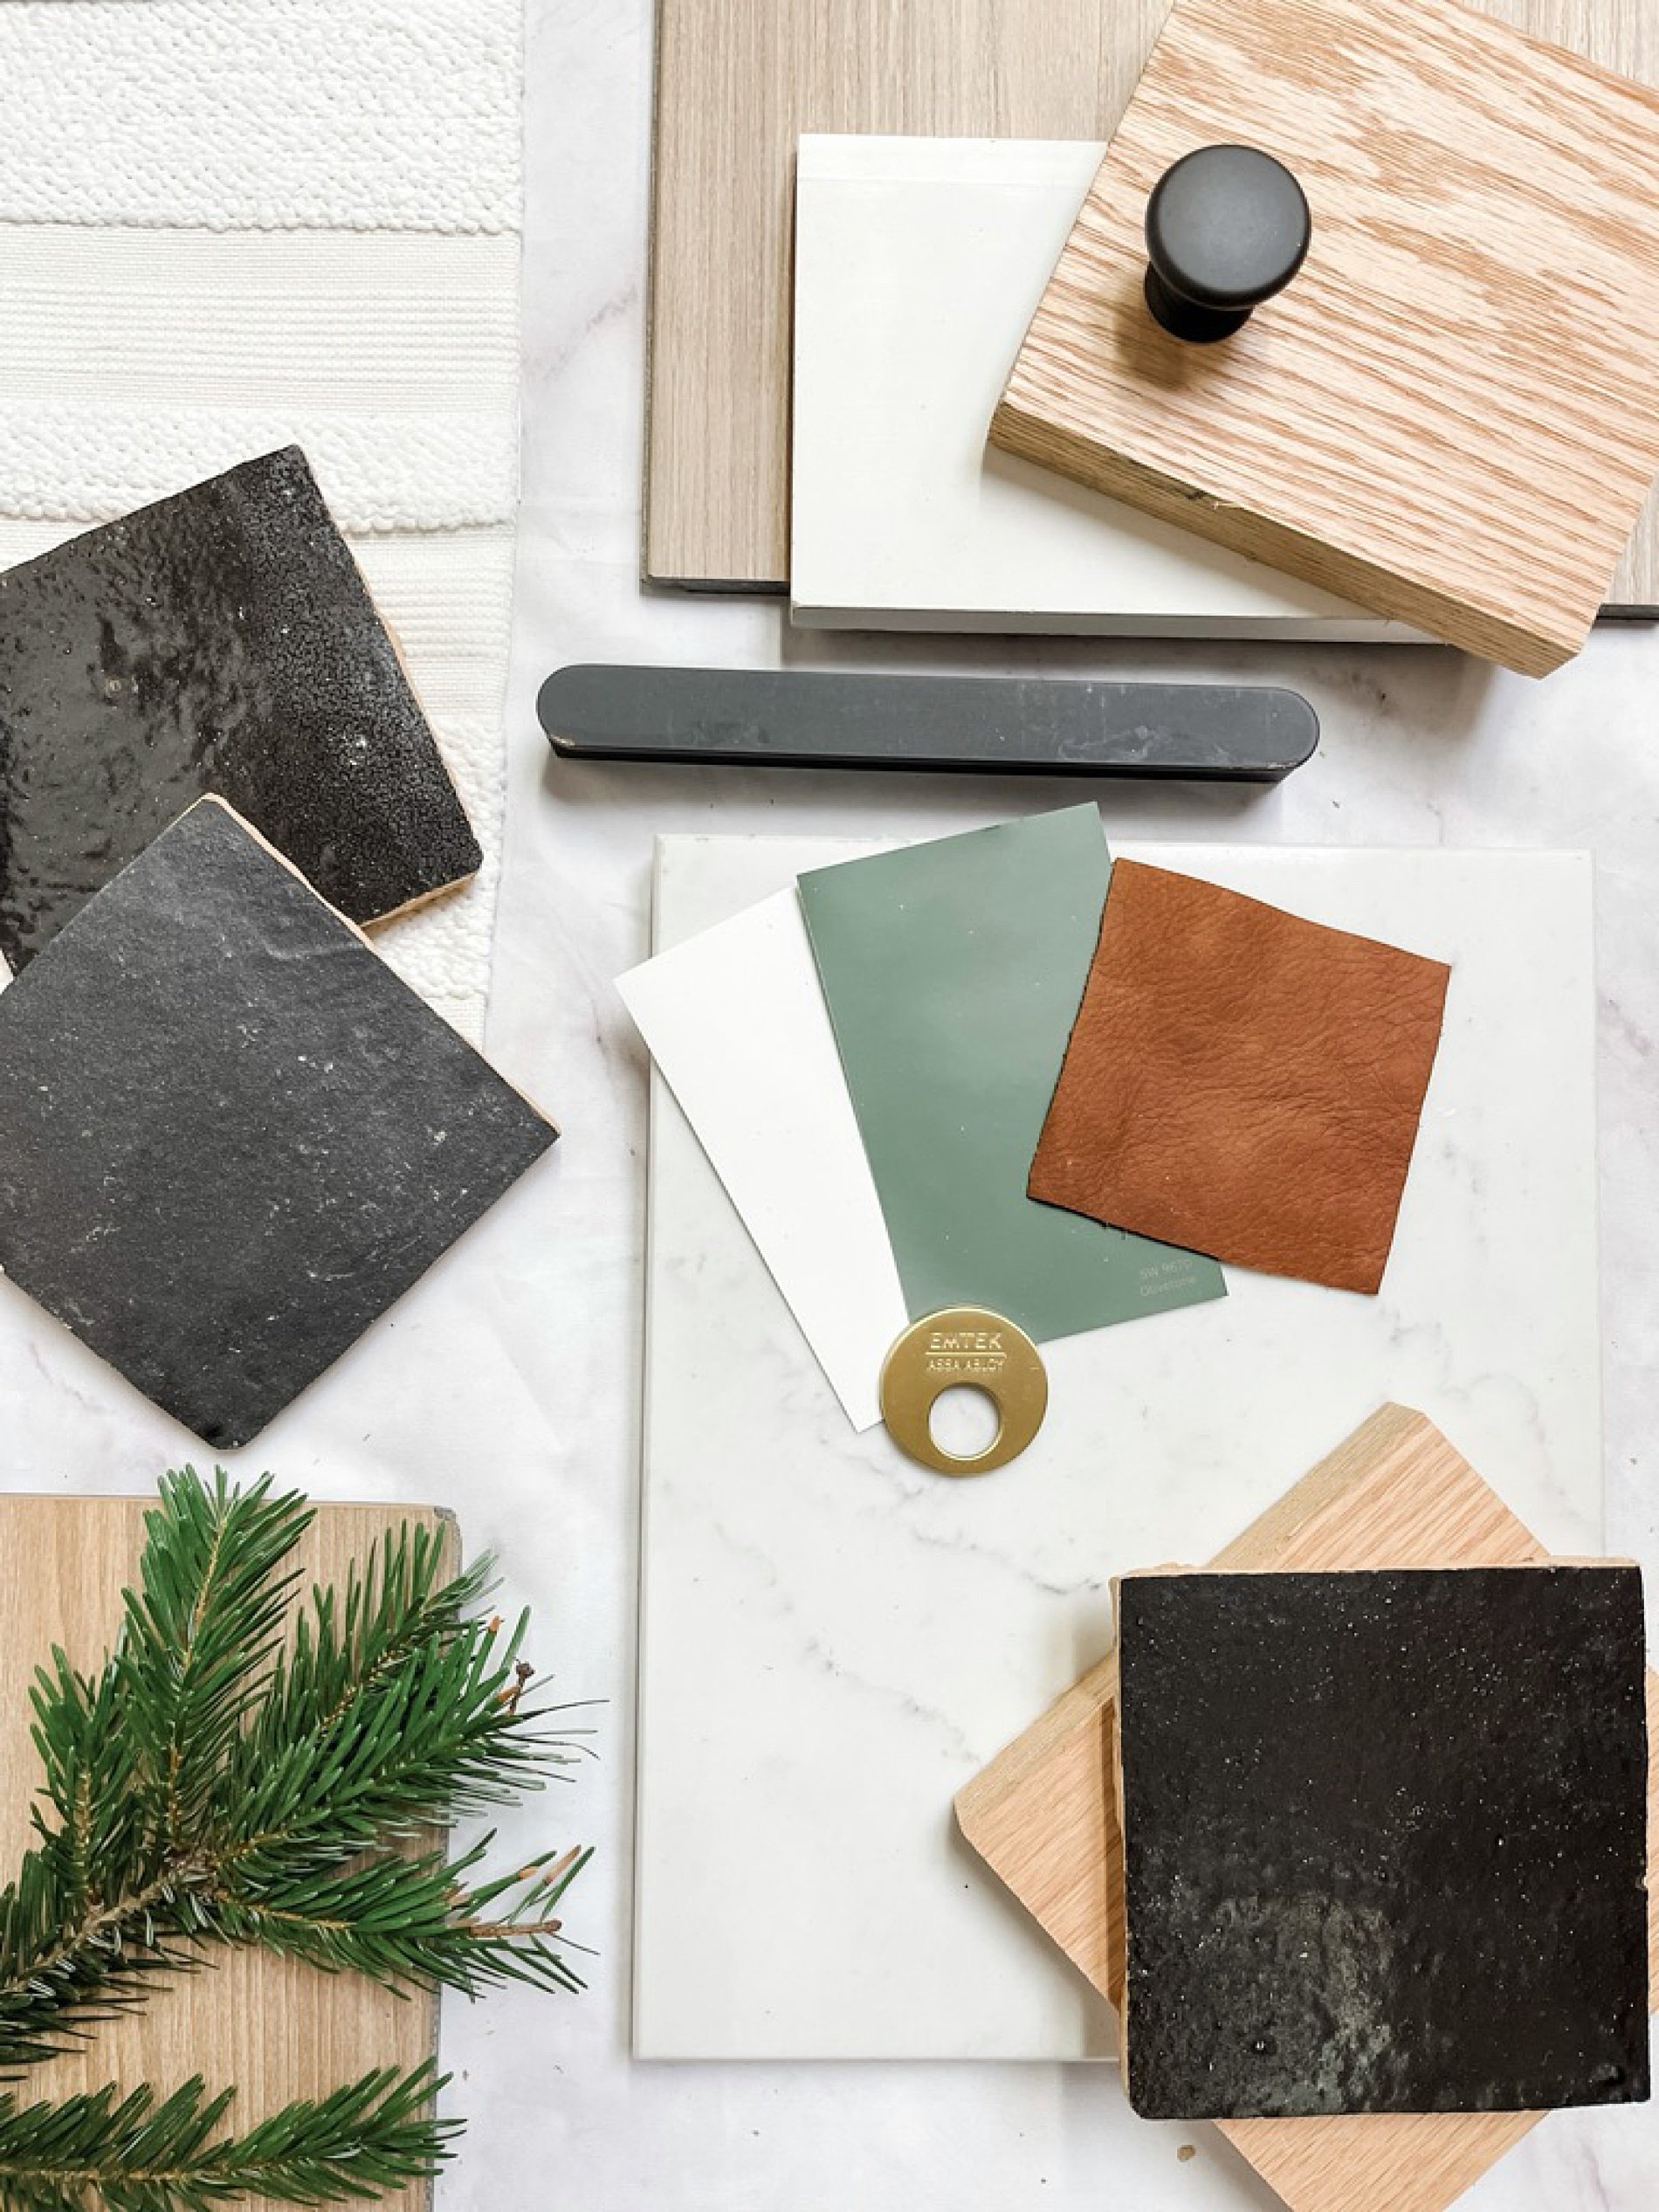  earthy and neutral toned mood board for interior design project 